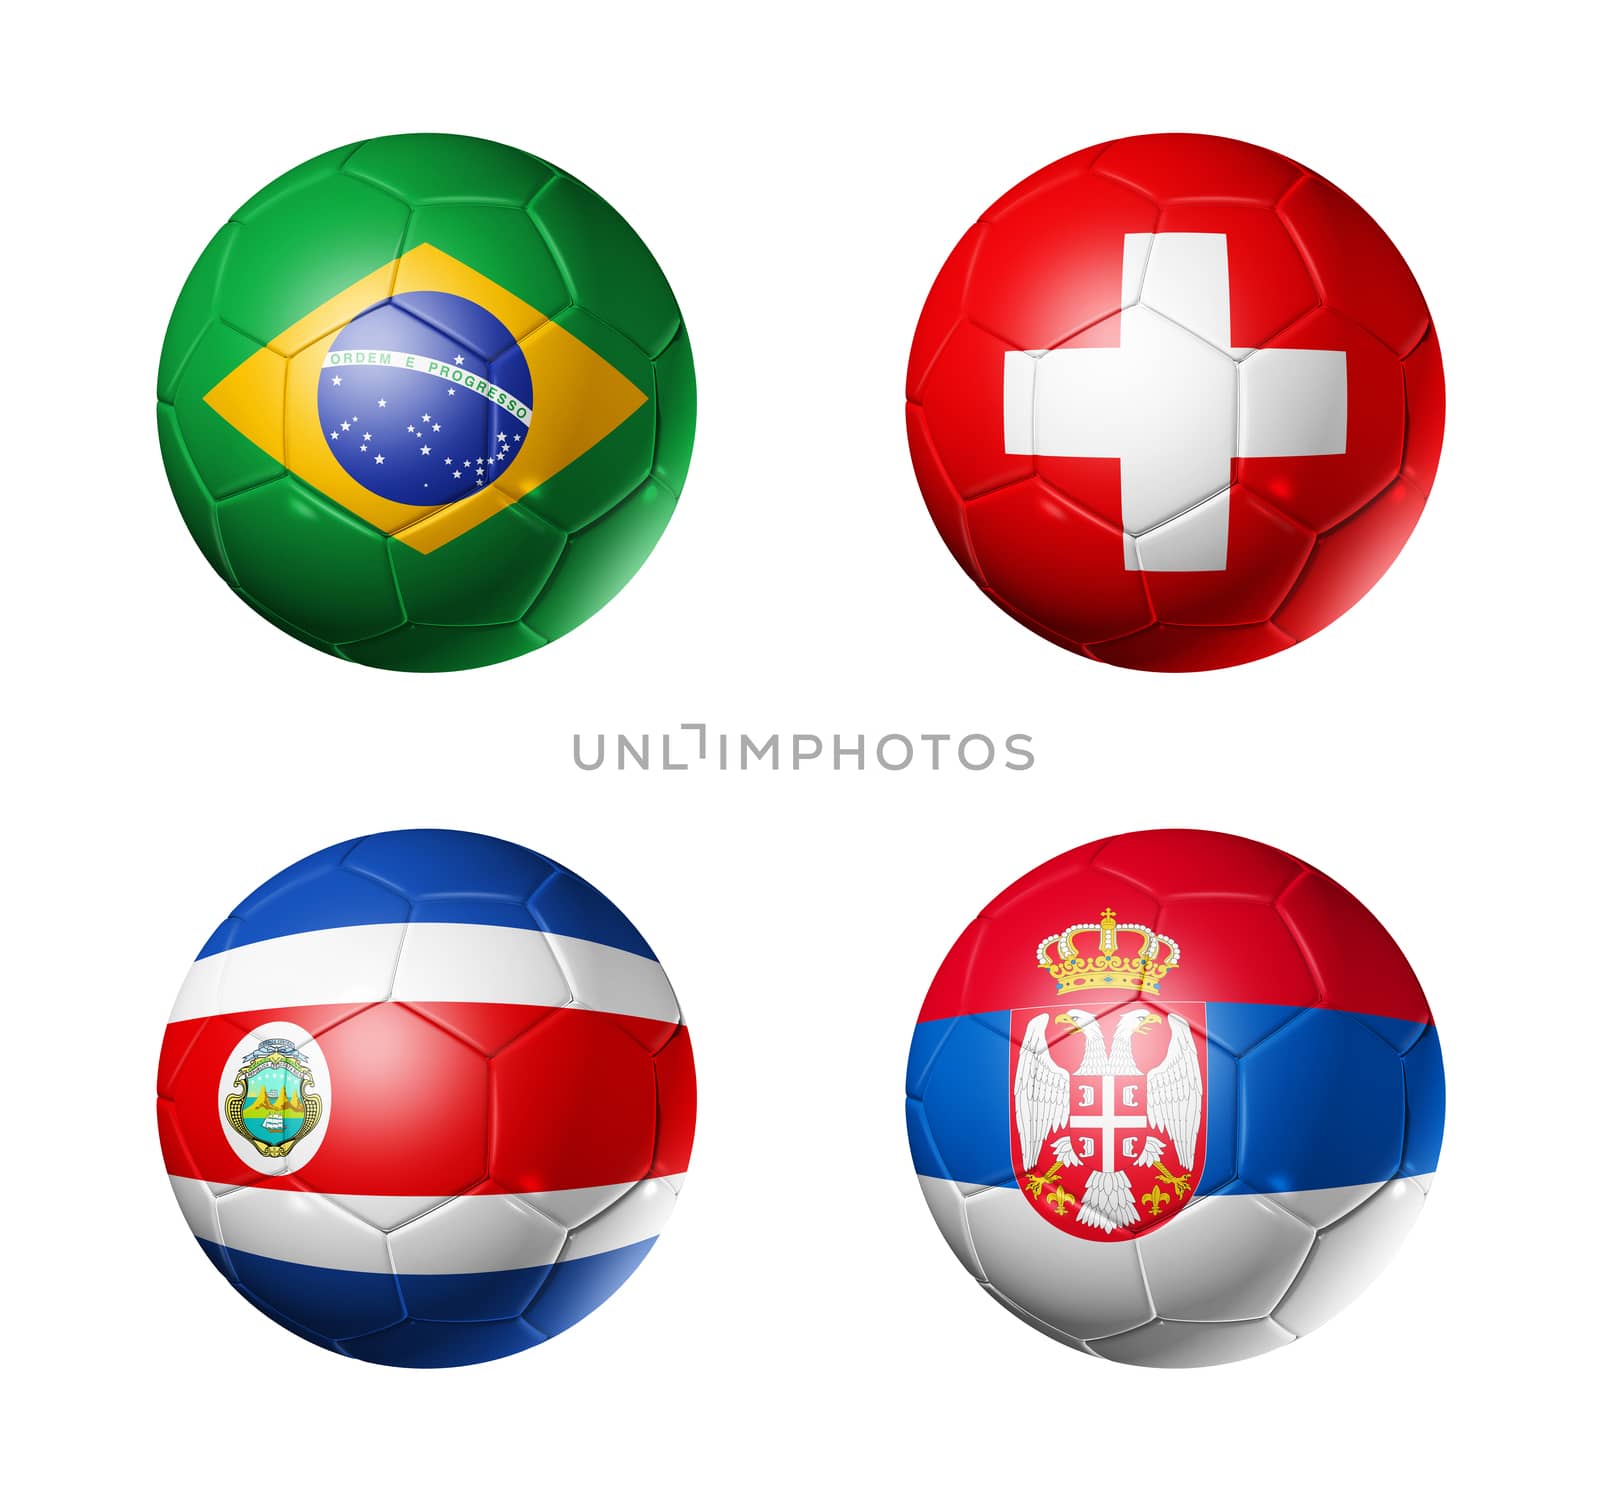 Russia football 2018 group E flags on soccer balls by daboost